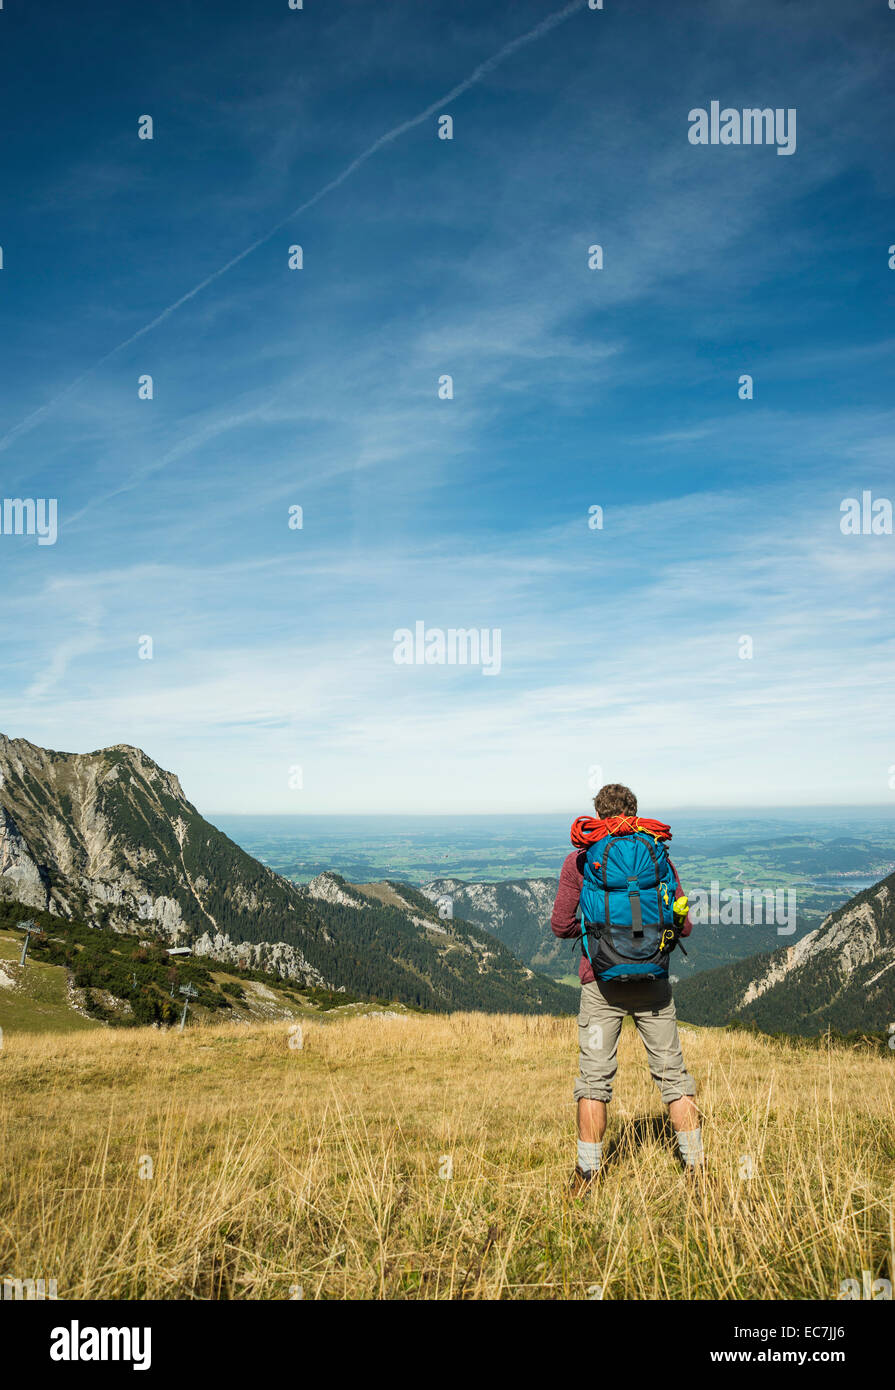 Austria, Tyrol, Tannheimer Tal, young hiker looking at view Stock Photo